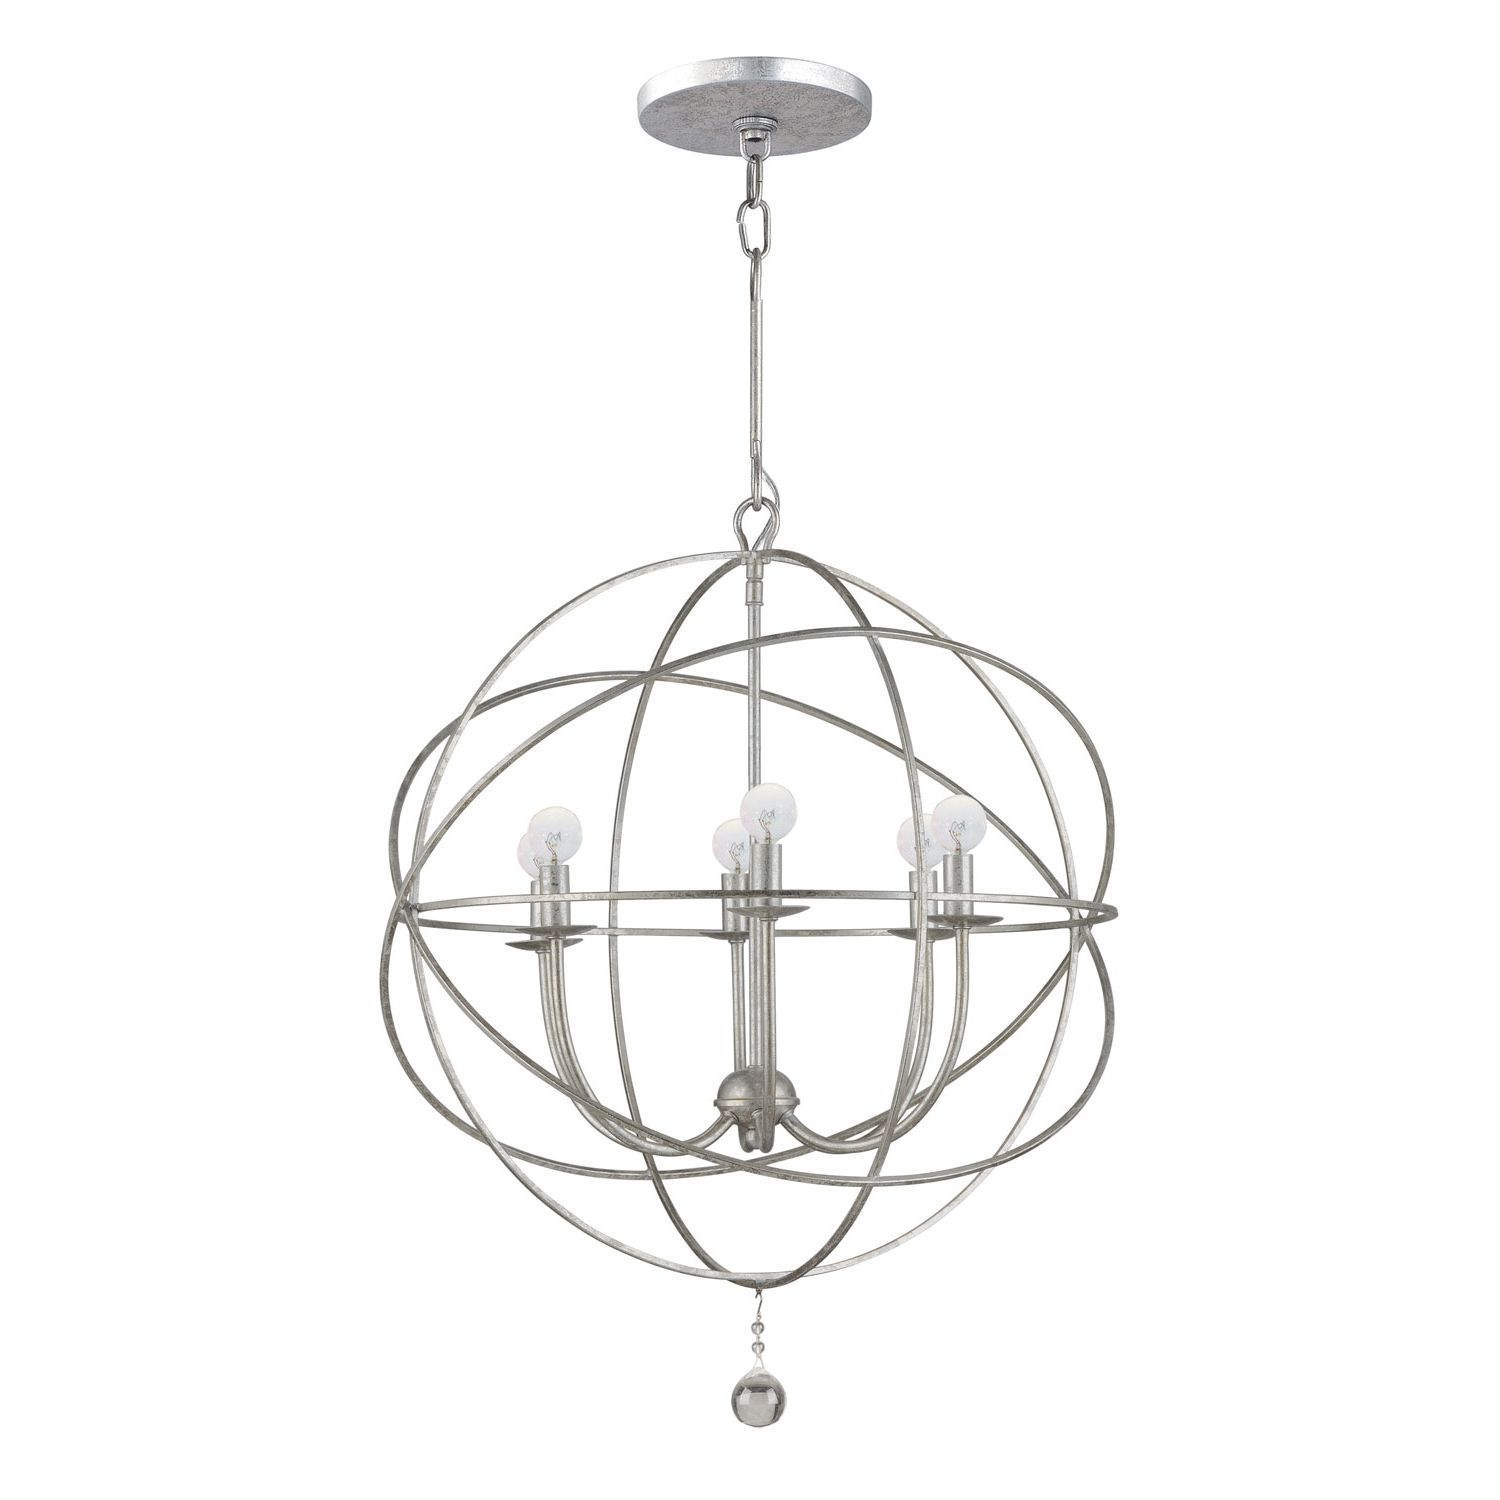 Crystorama Lighting Group Solaris Olde Silver Six Light Chandelier With Regard To Most Up To Date Modern Silver Chandelier (View 1 of 20)